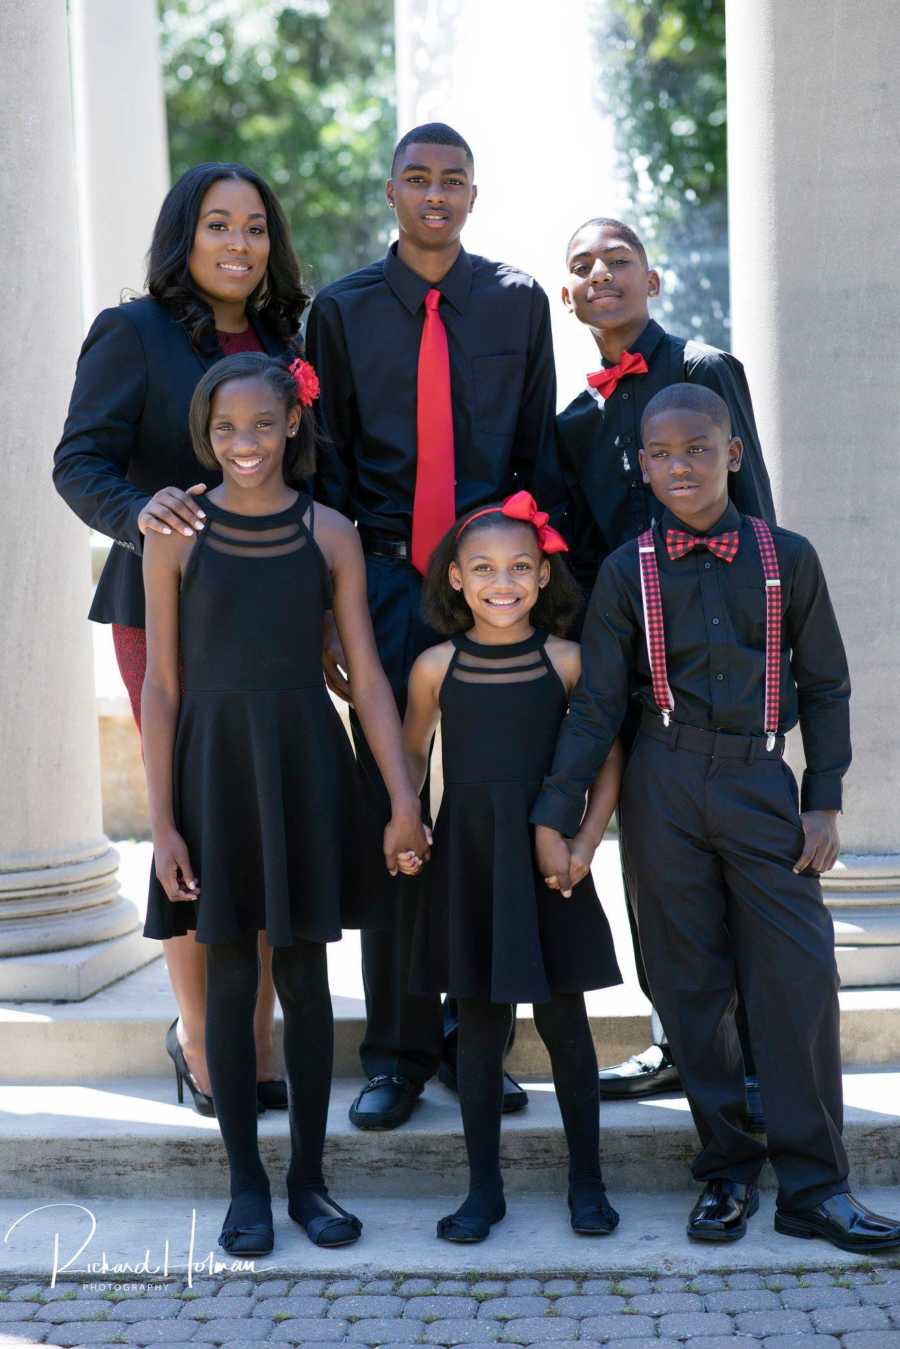 Single mother of five stands with her children smiling in formal attire